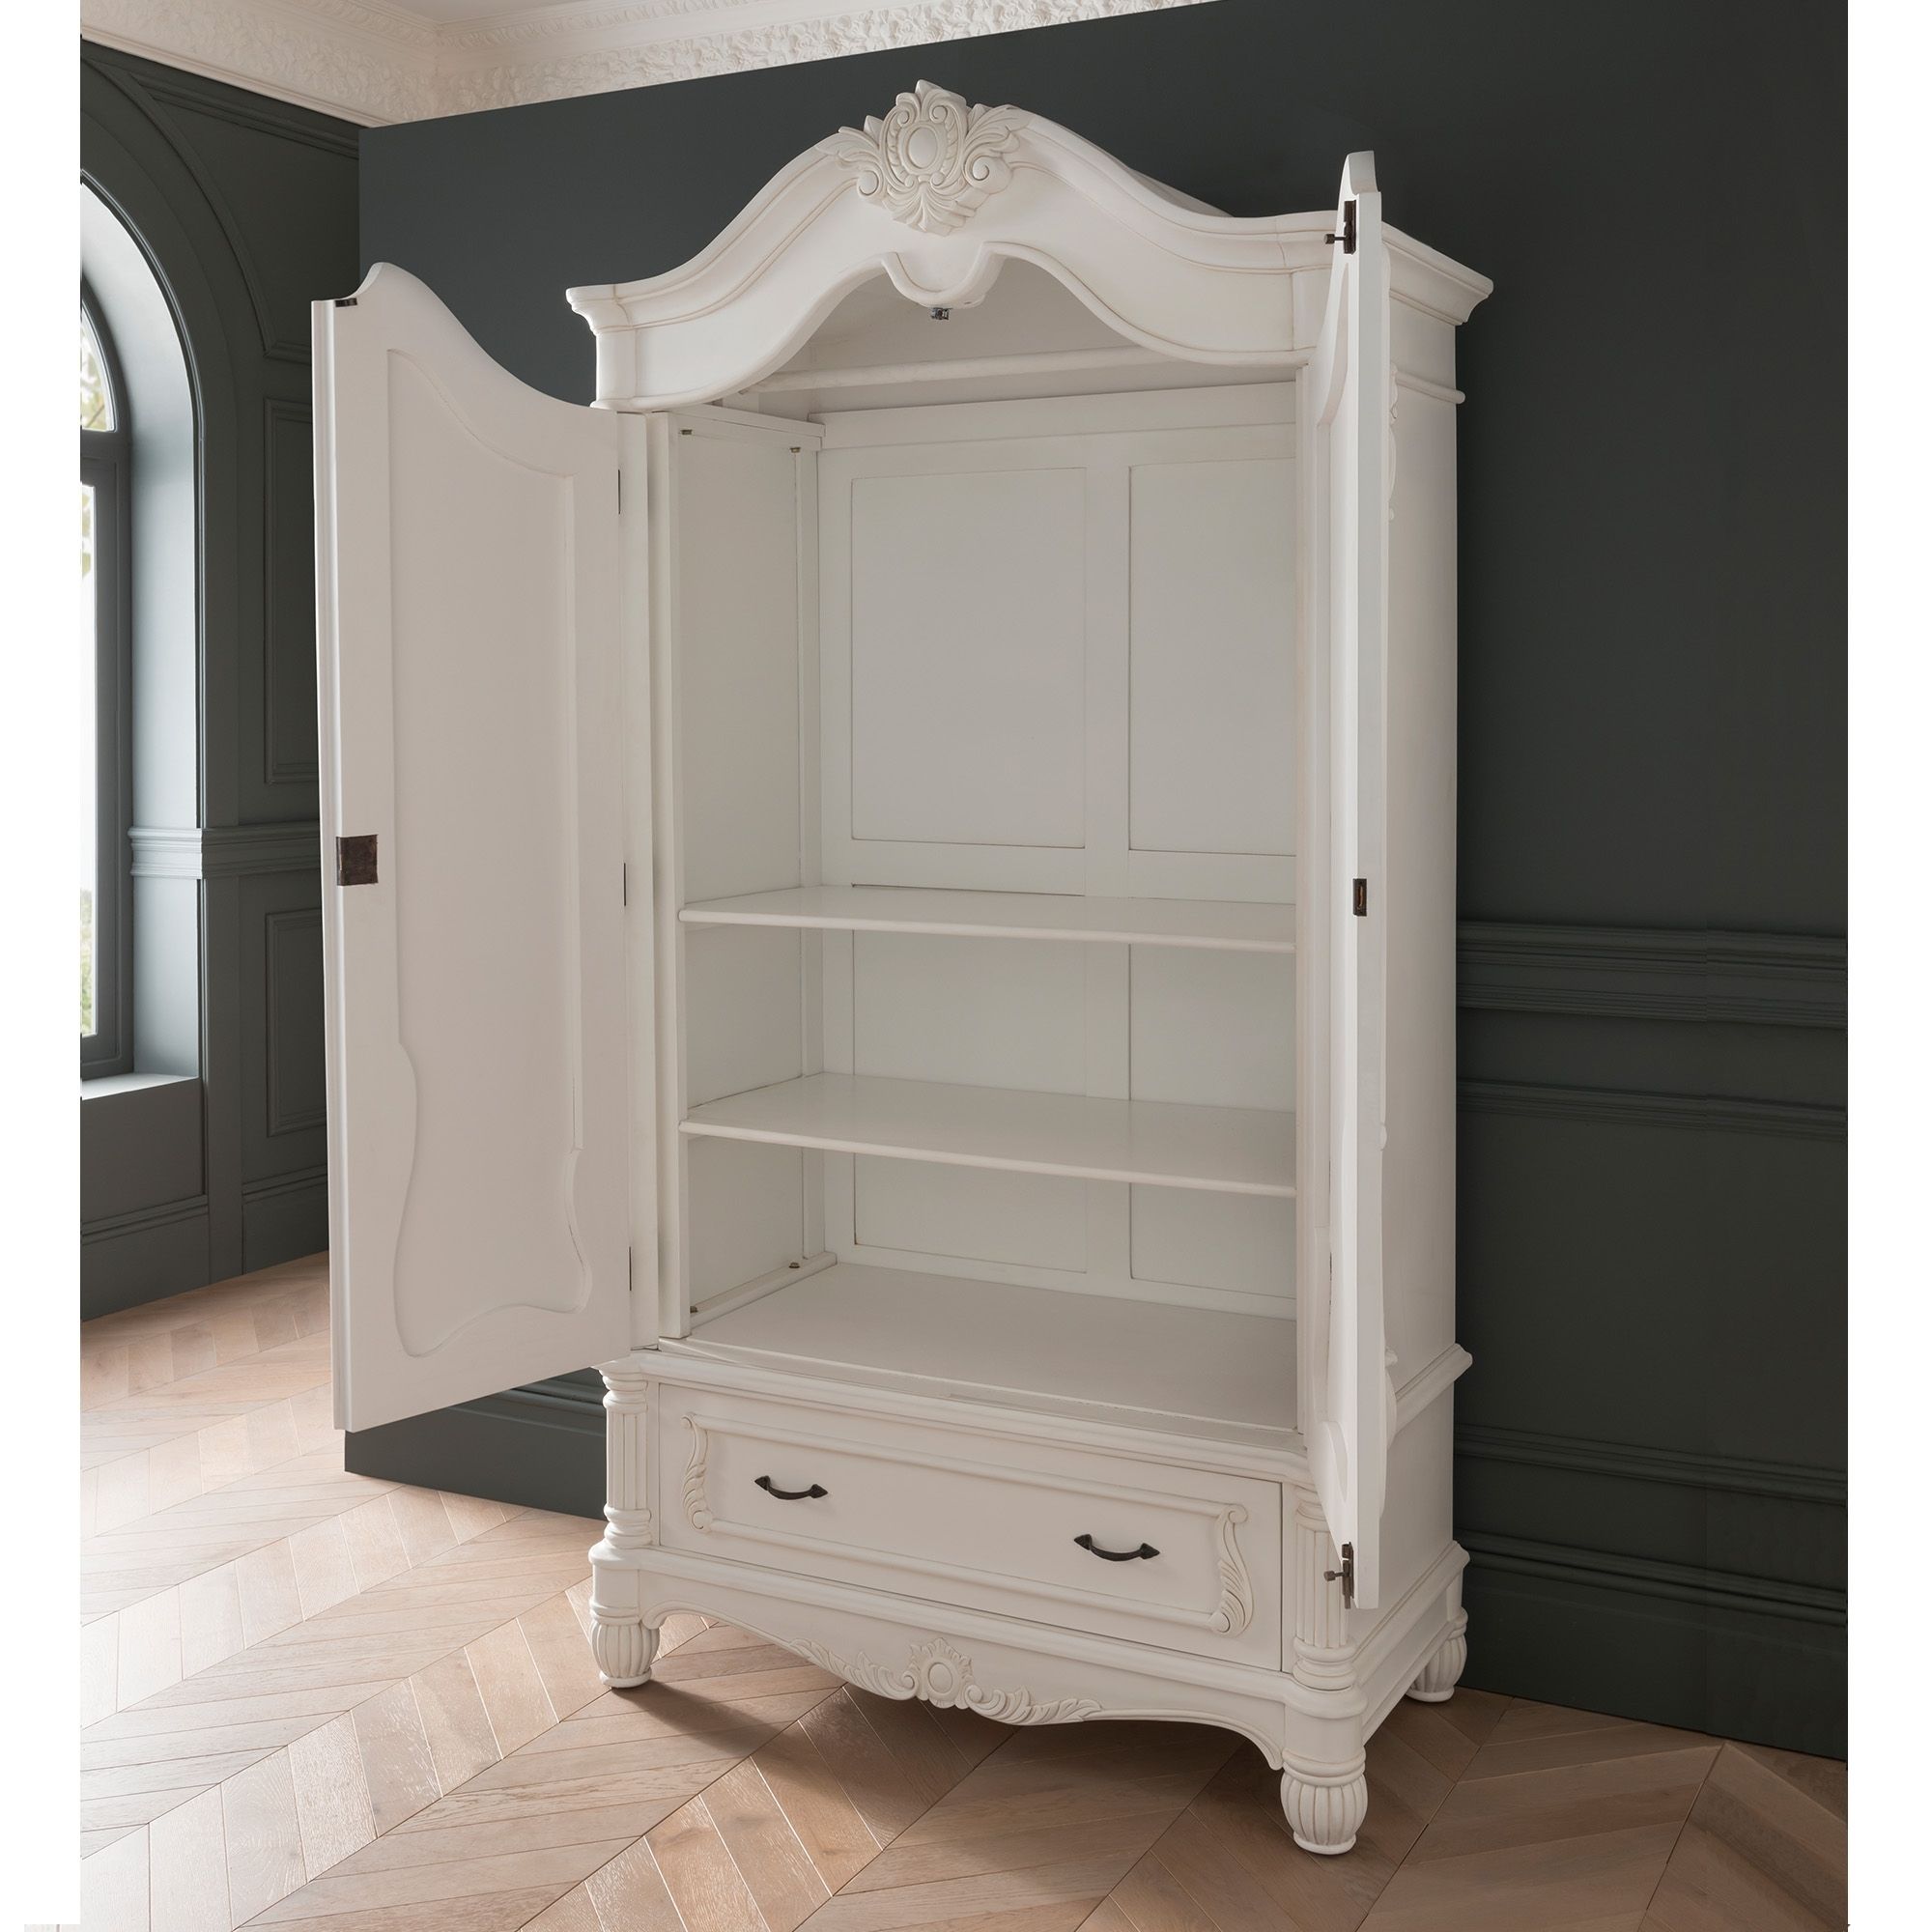 Antique French Style White Finished 1 Drawer Wardrobe | Homesdirect365 Throughout White Antique Wardrobes (View 2 of 15)